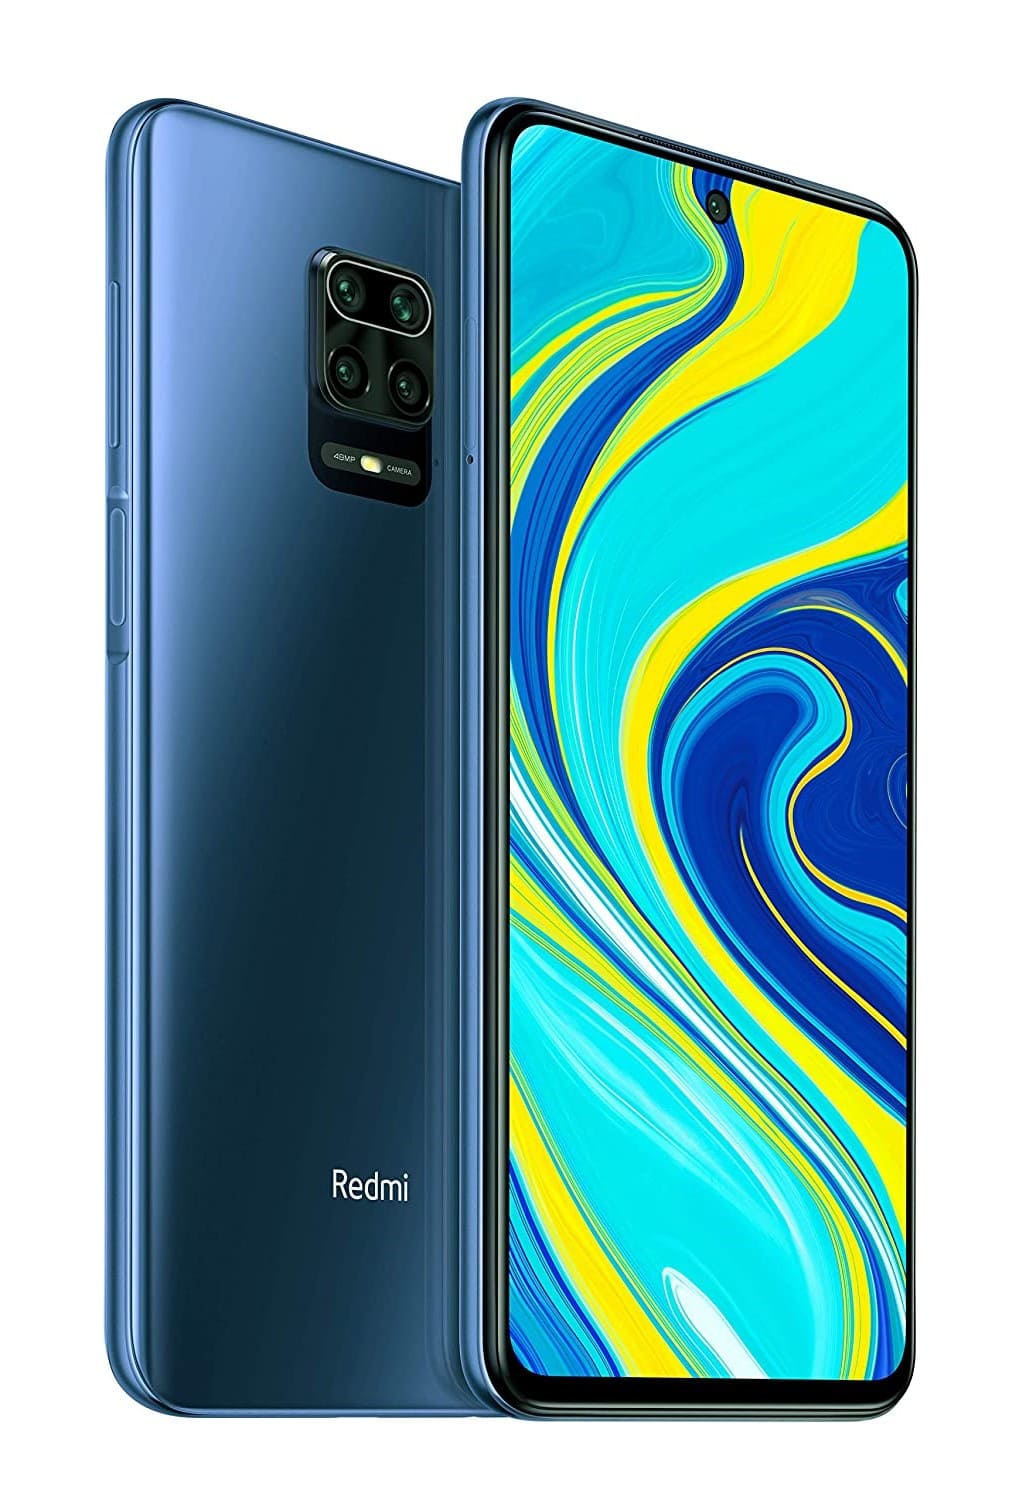 Redmi Note 9 Pro is one of the best mobile